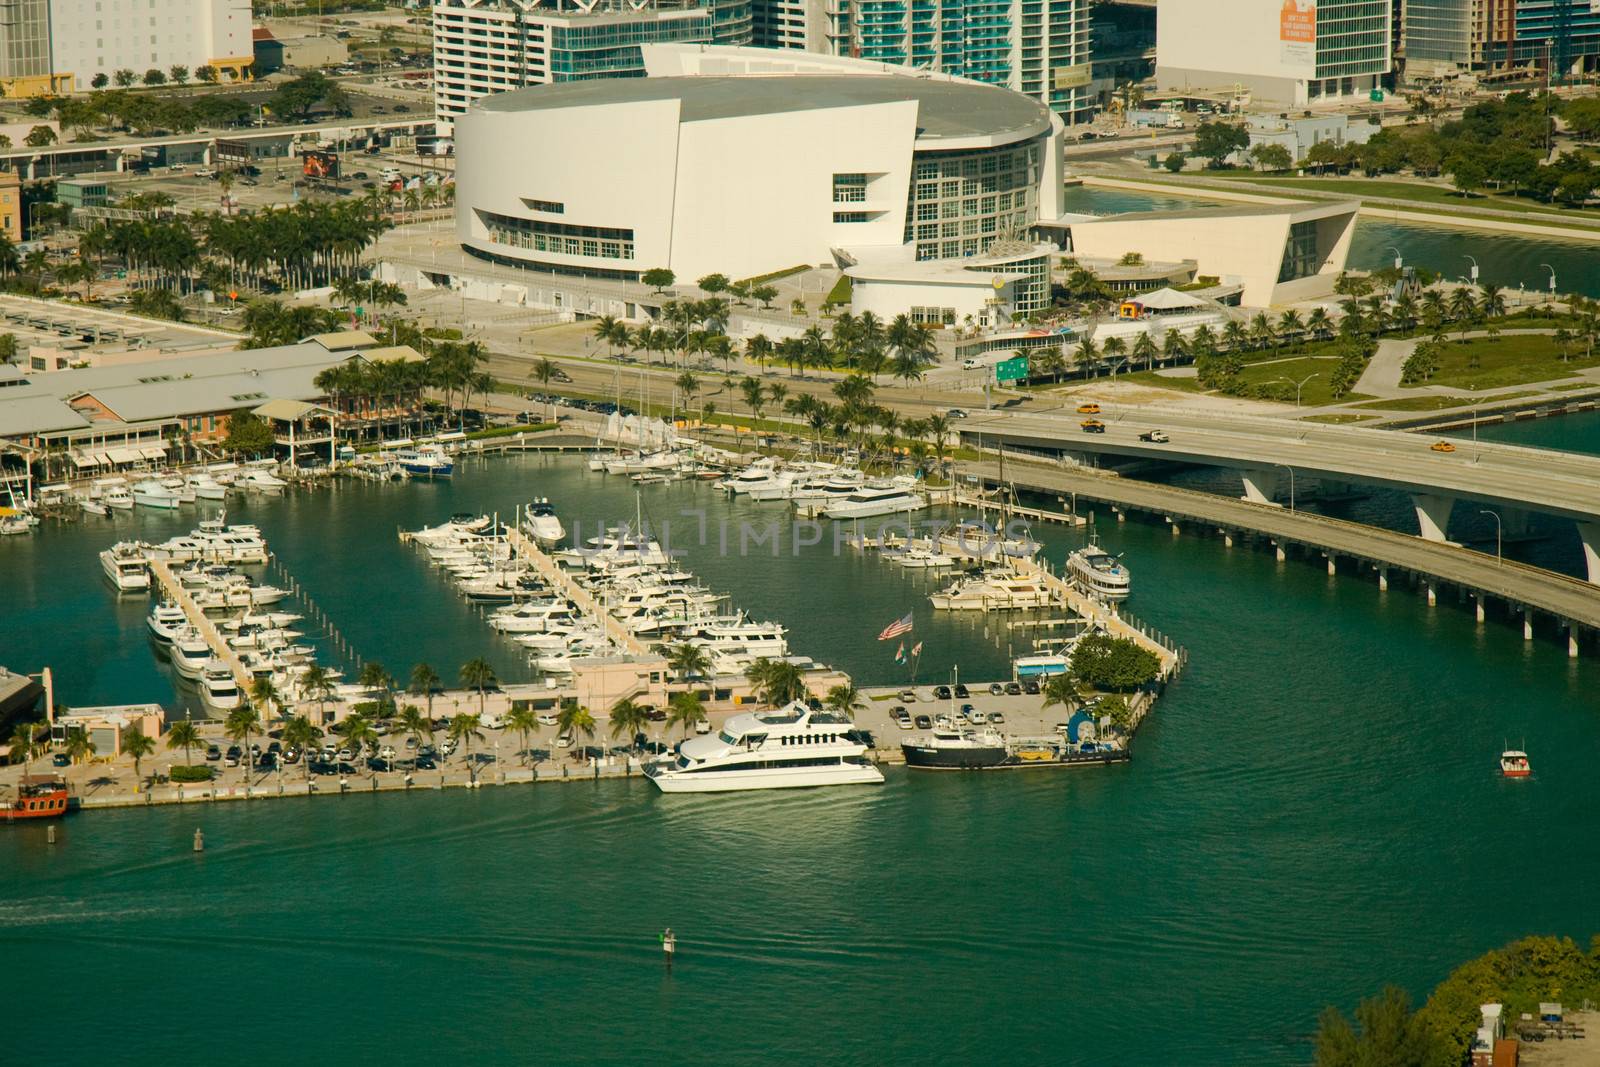 American Airlines Arena at the waterfront by CelsoDiniz